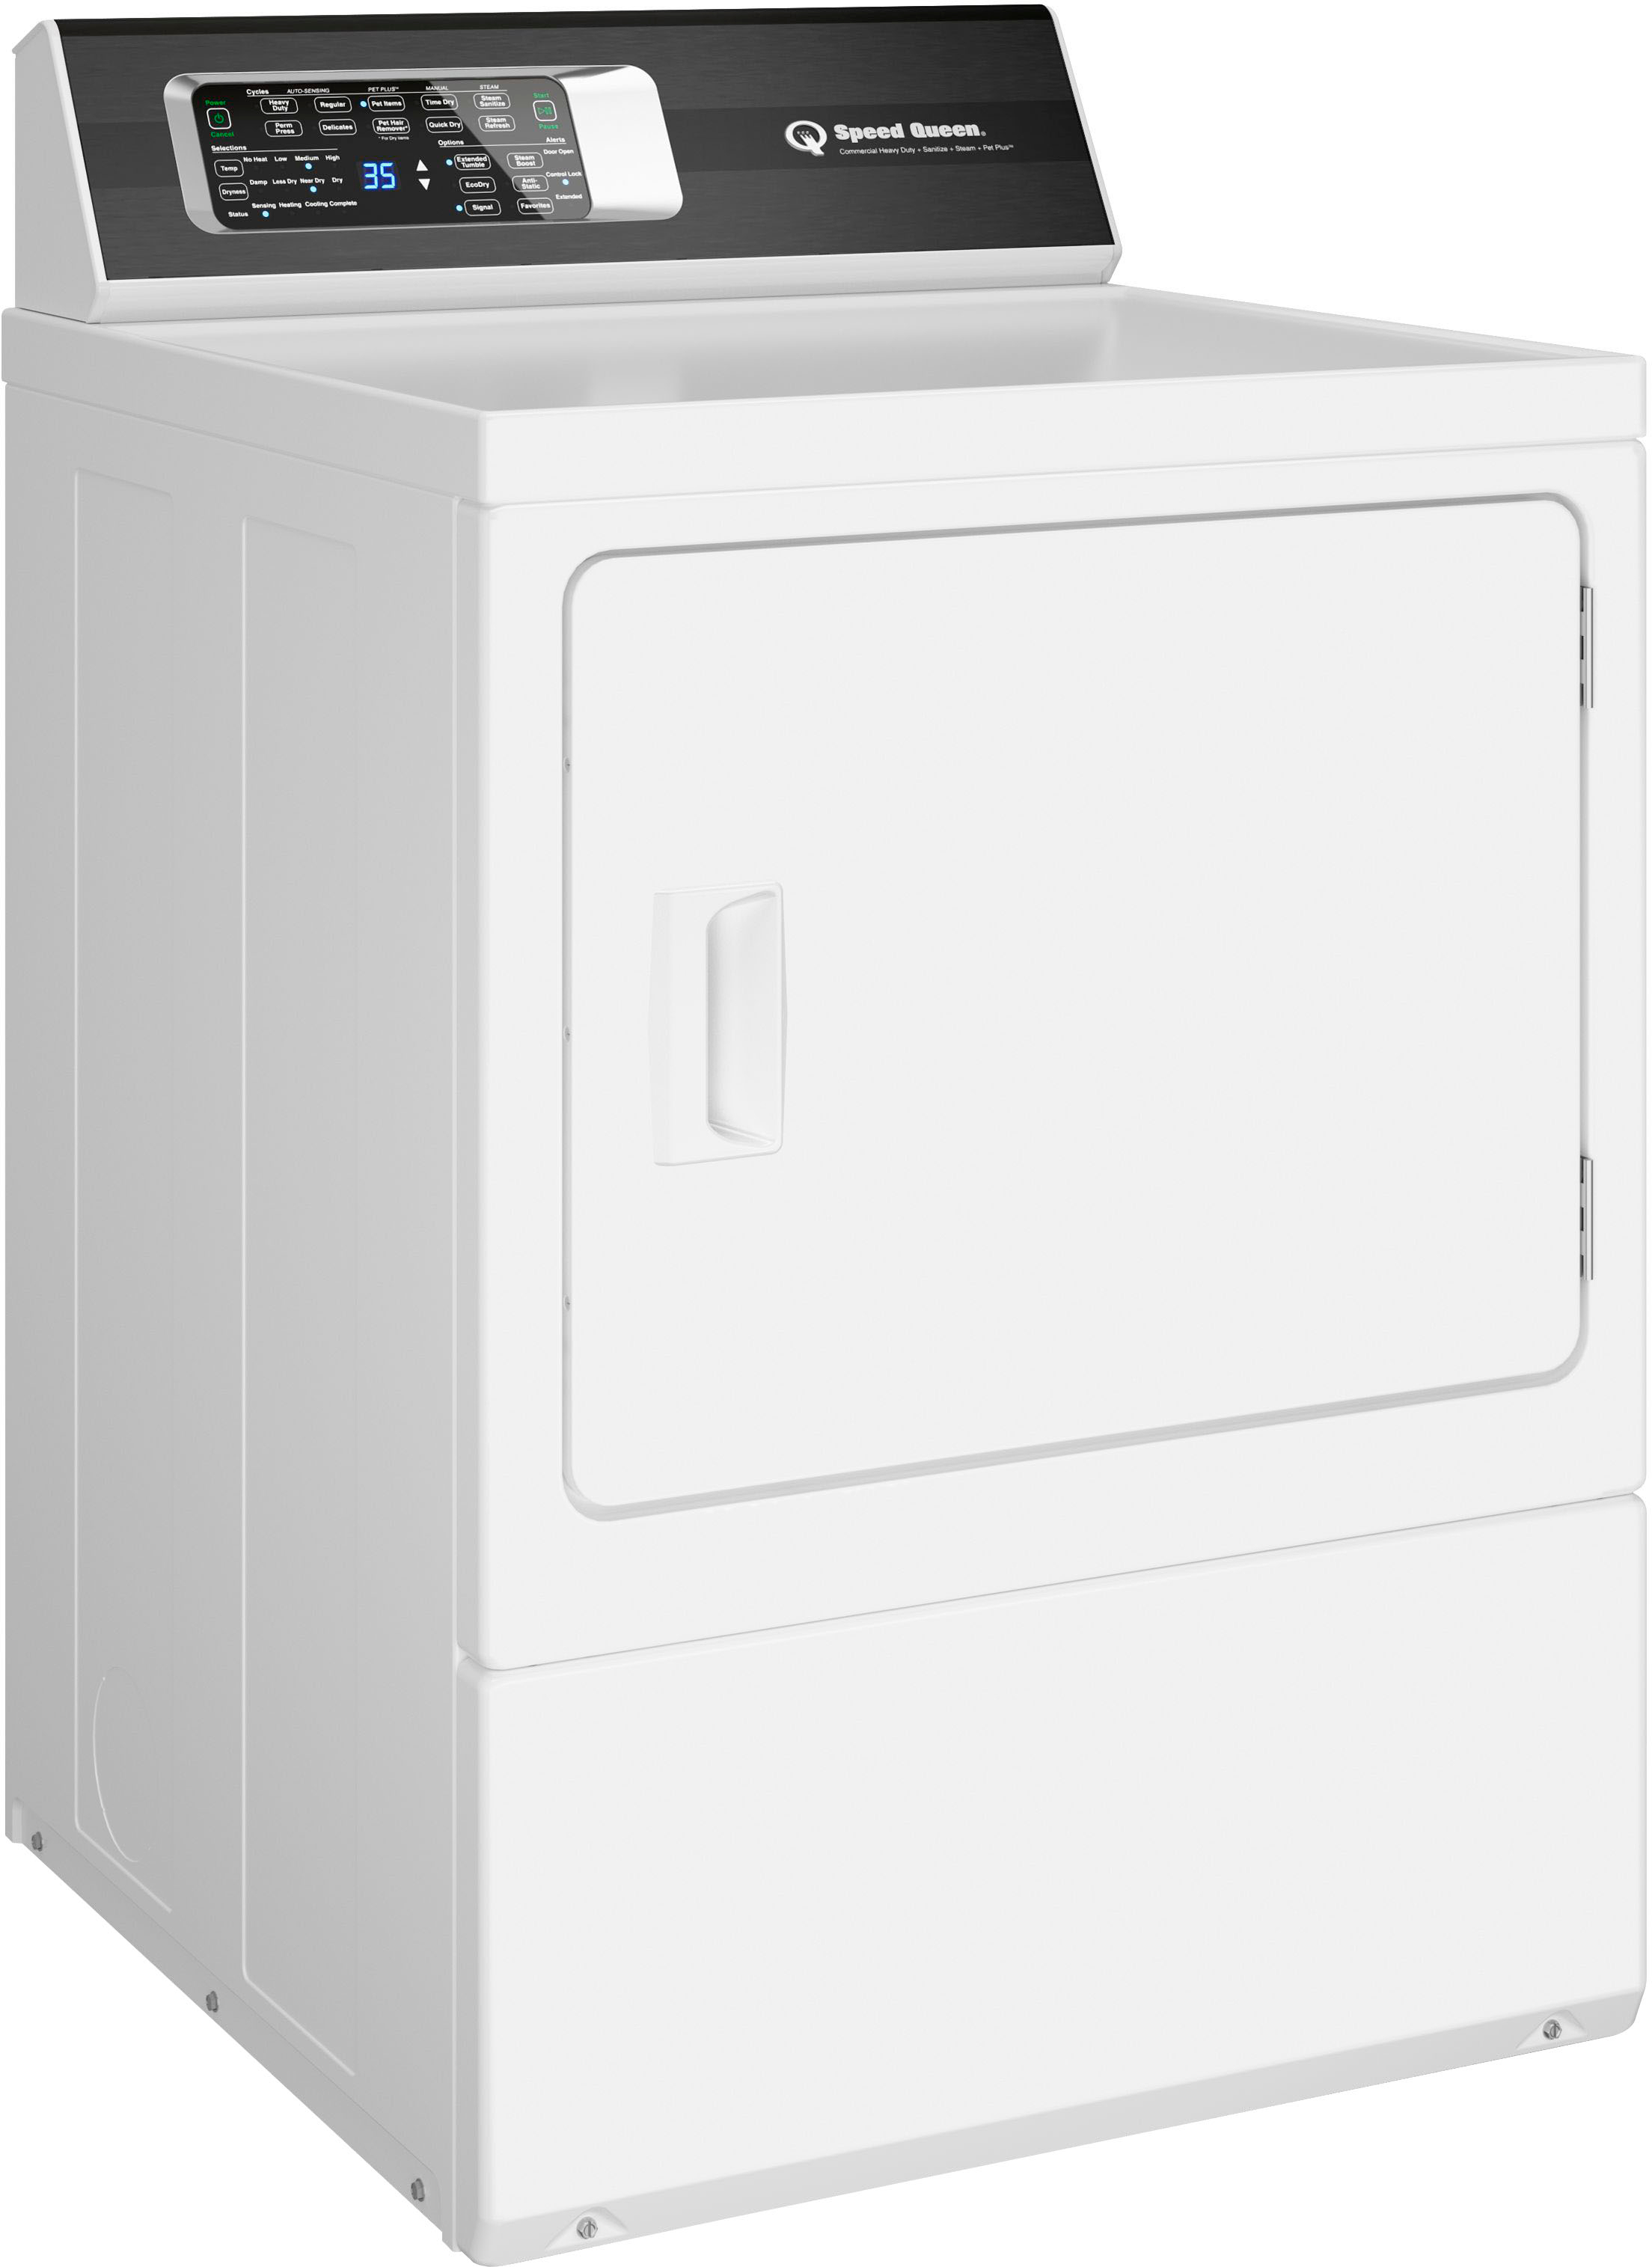 Left View: Speed Queen - DR7 Pet Friendly Sanitizing Electric Dryer - White